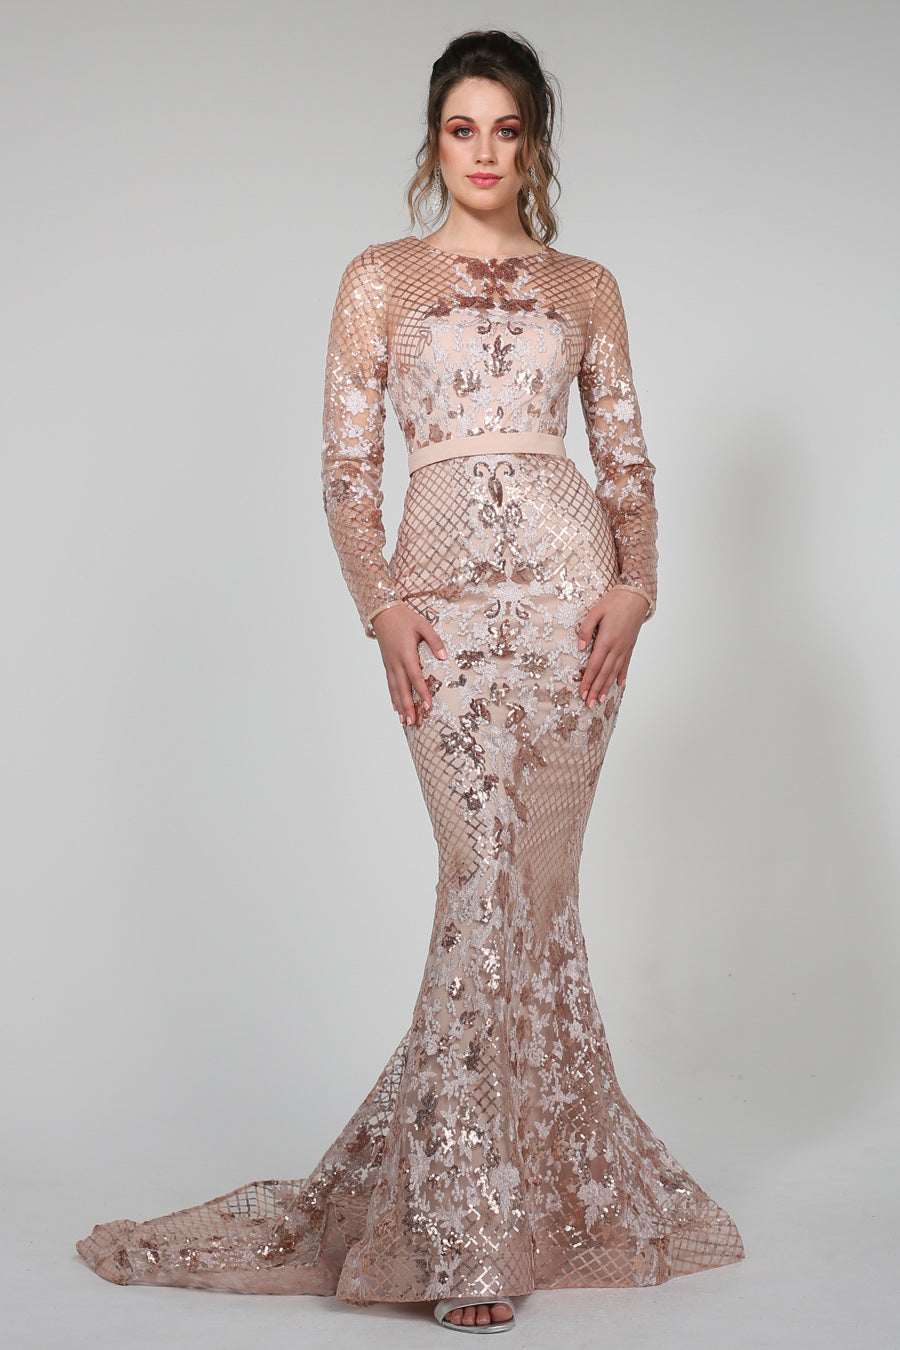 Tina Holly Couture TA139 Rose Gold Sequin Long Sleeve Mermaid Formal Dress {vendor} AfterPay Humm ZipPay LayBuy Sezzle